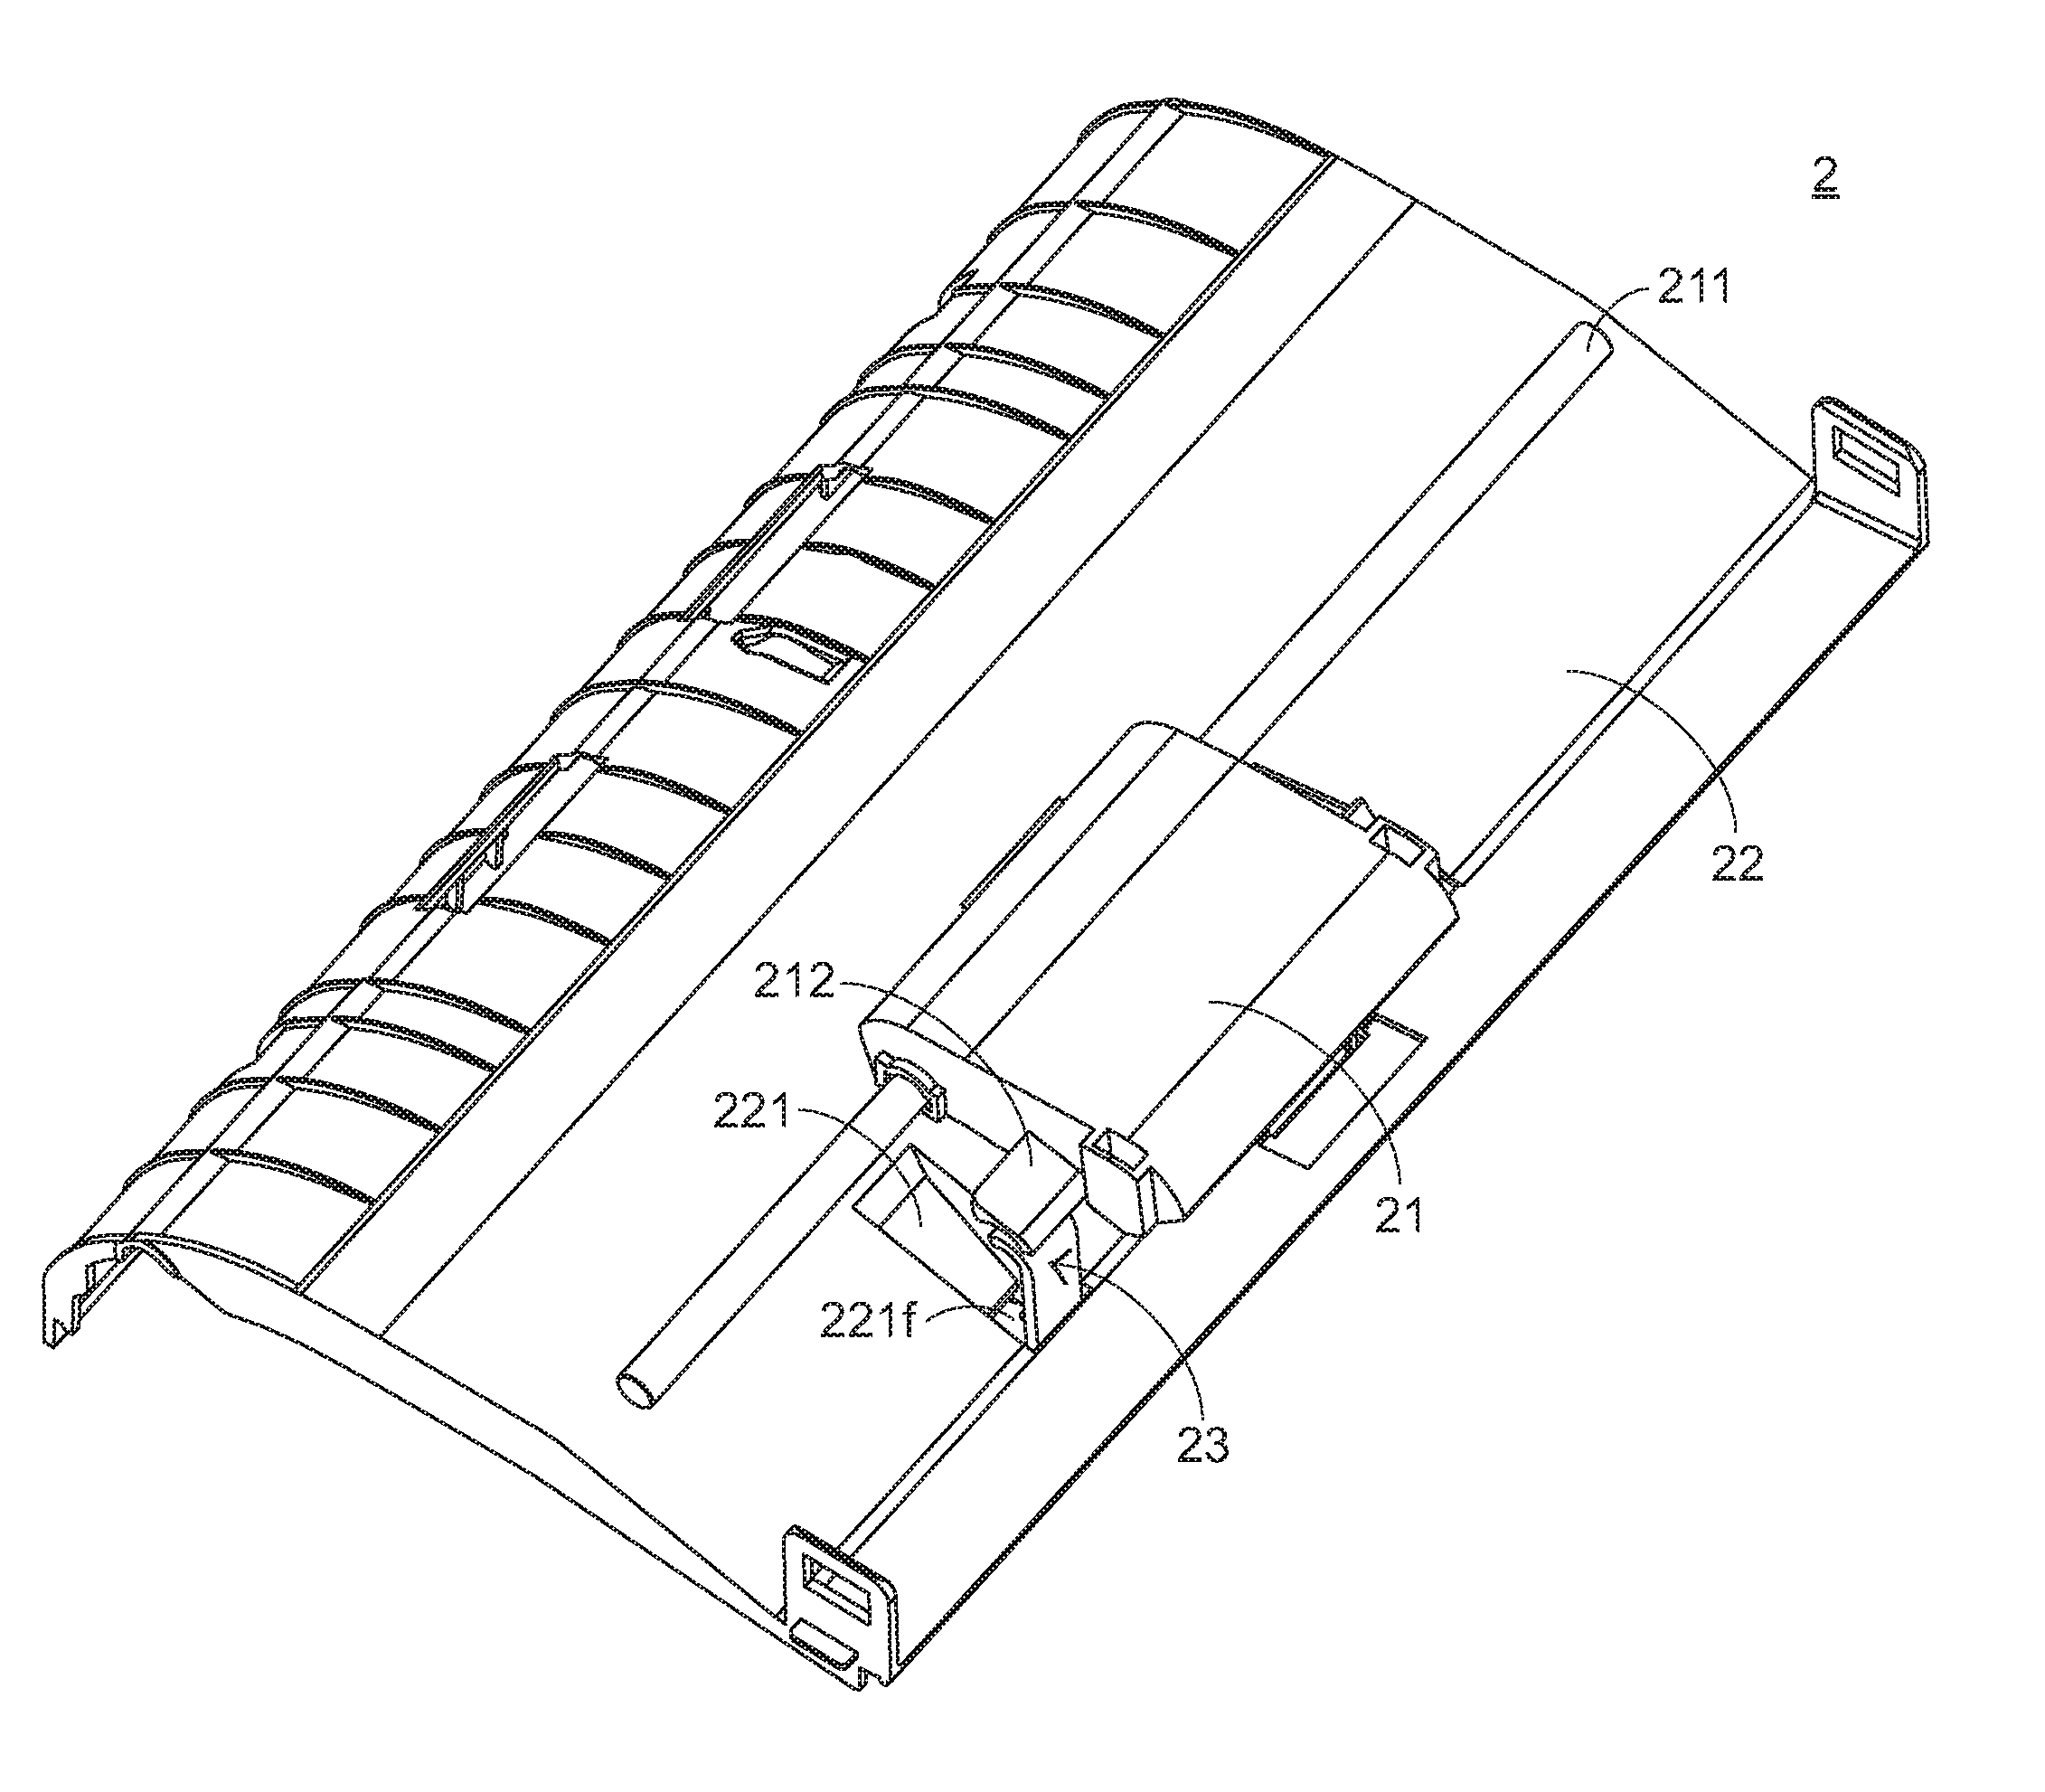 Sheet stopping structure